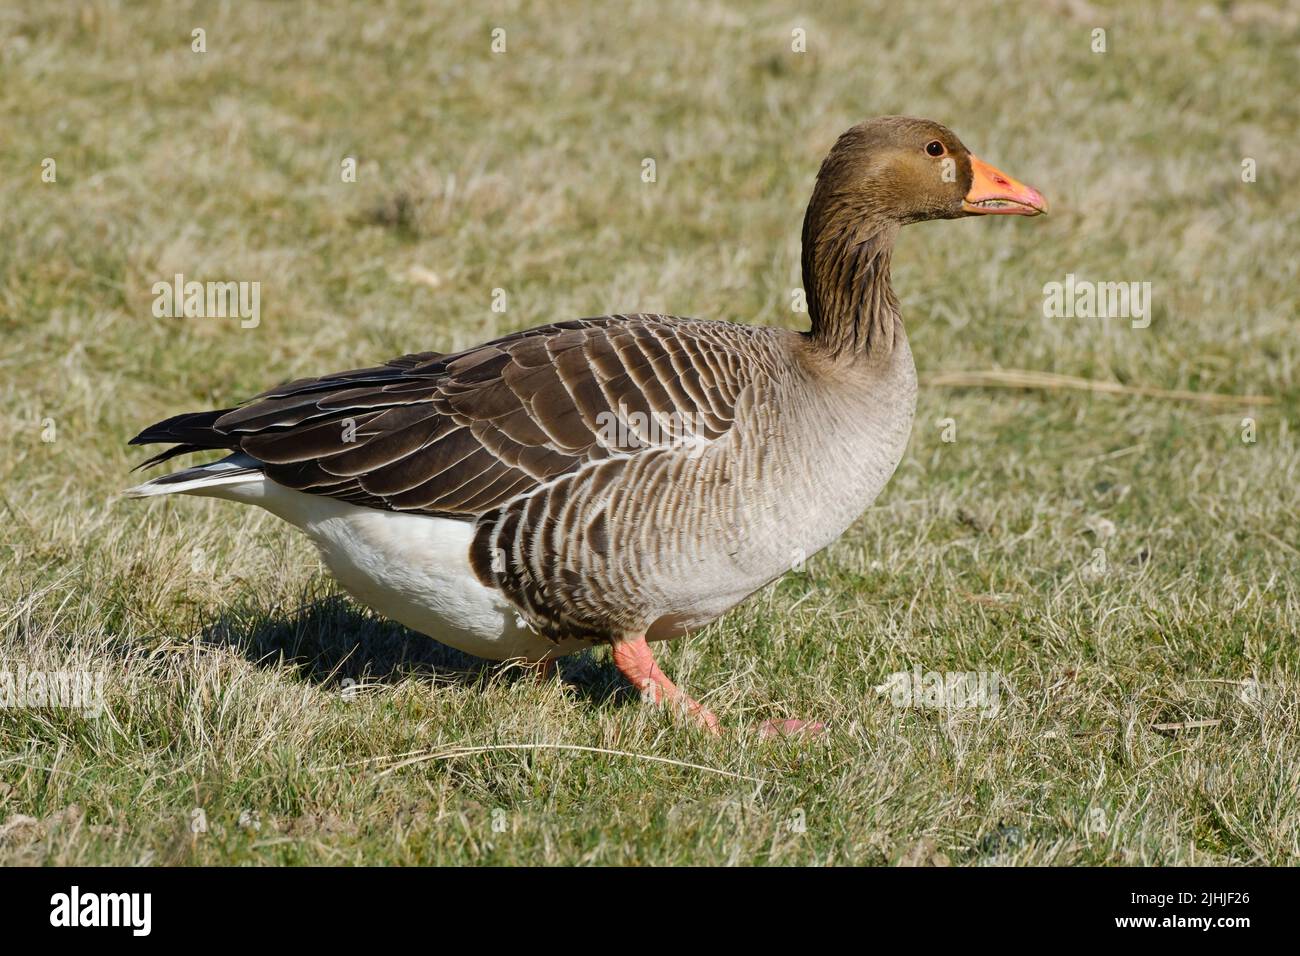 Greylag goose on a field Stock Photo